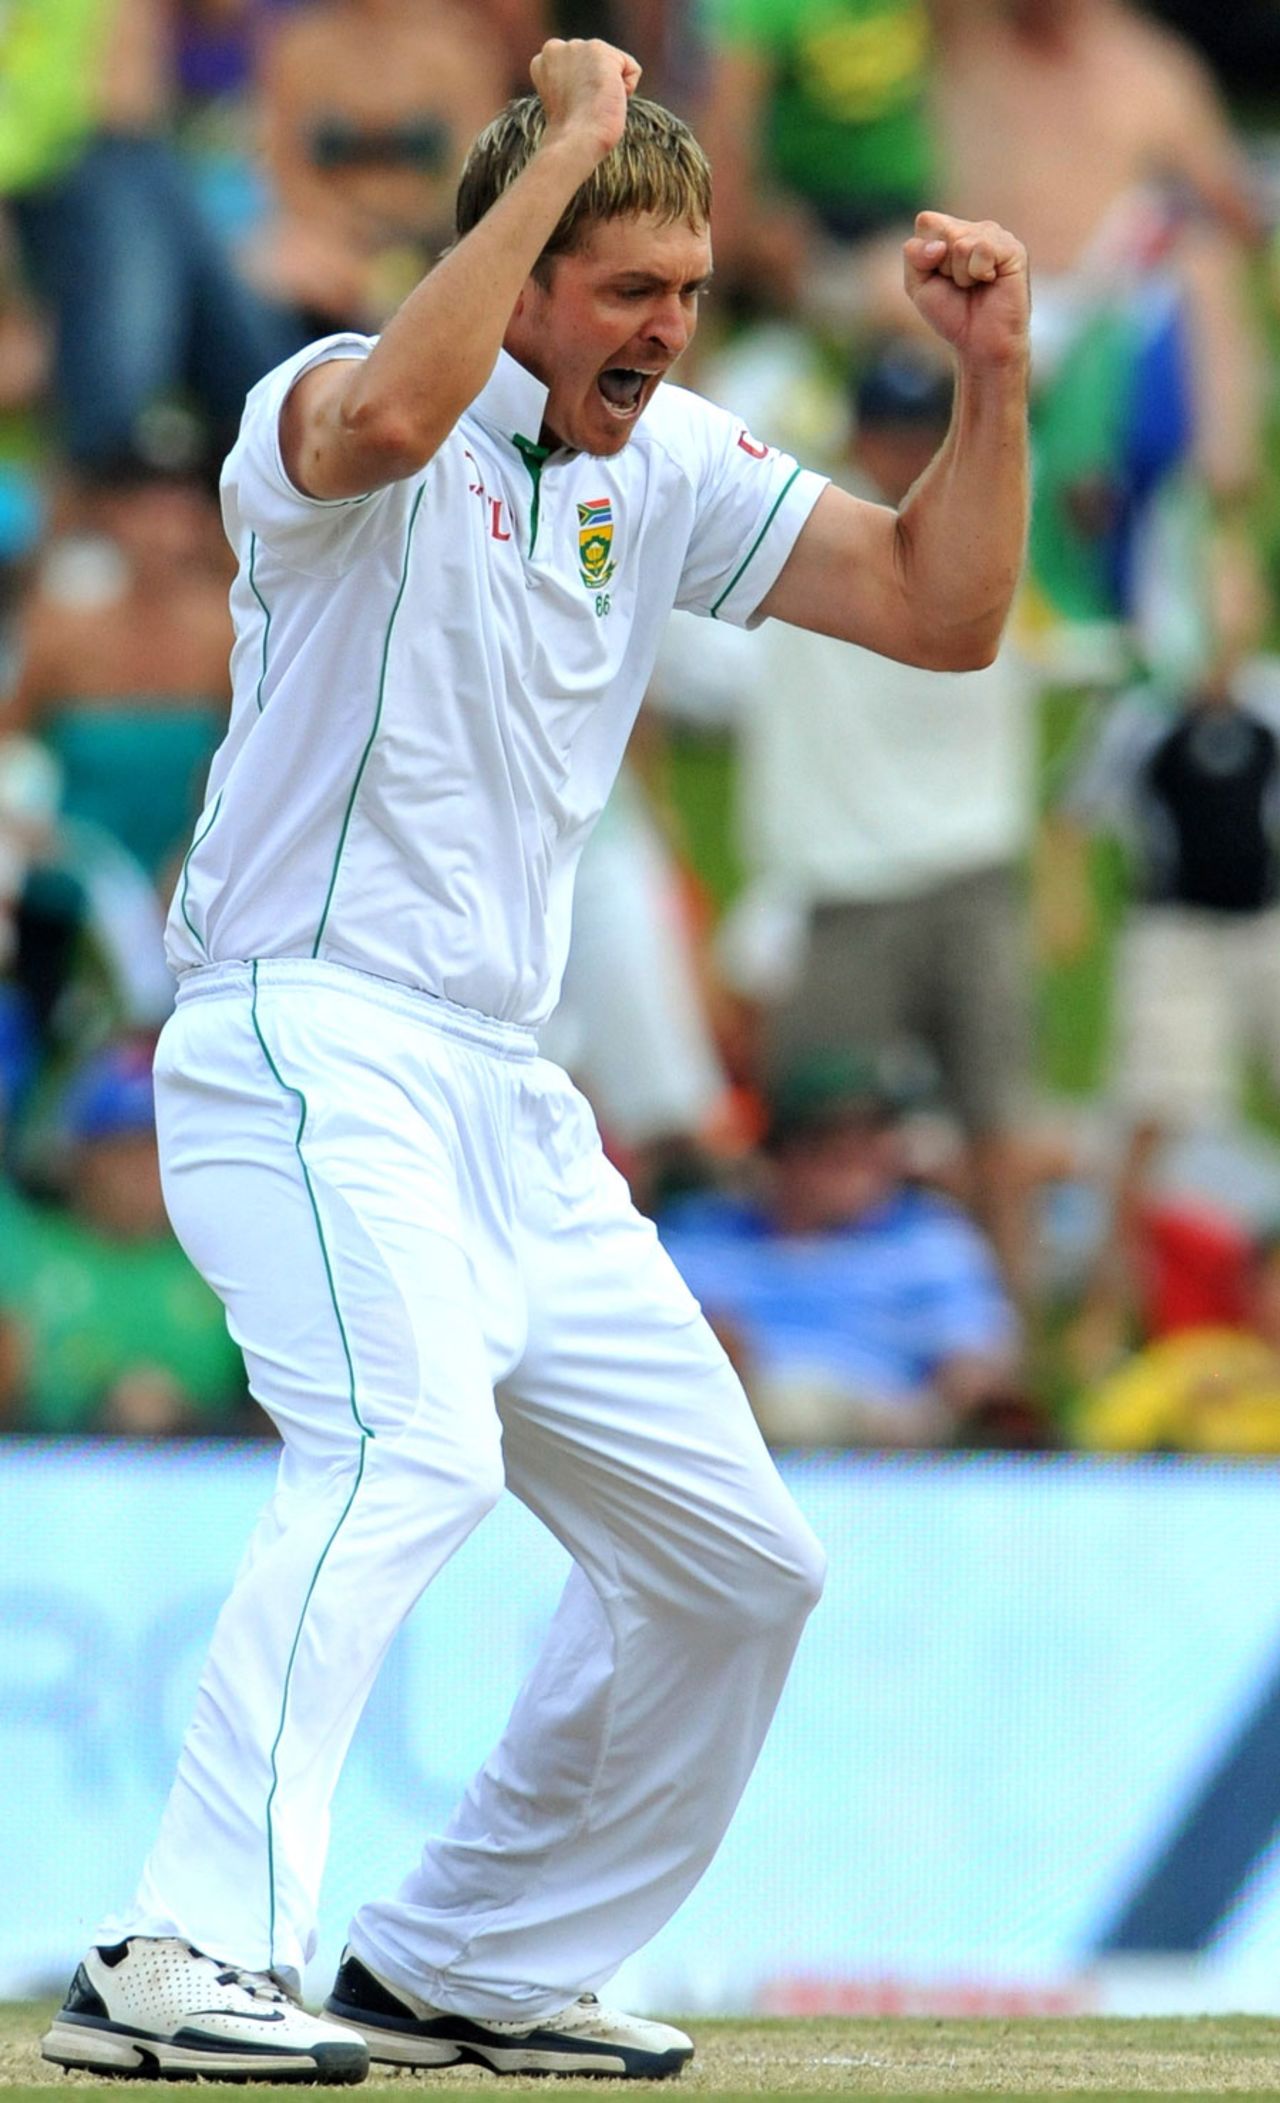 Paul Harris is delighted after removing Virender Sehwag, South Africa v India, 1st Test, Centurion, 3rd day, December 18, 2010 